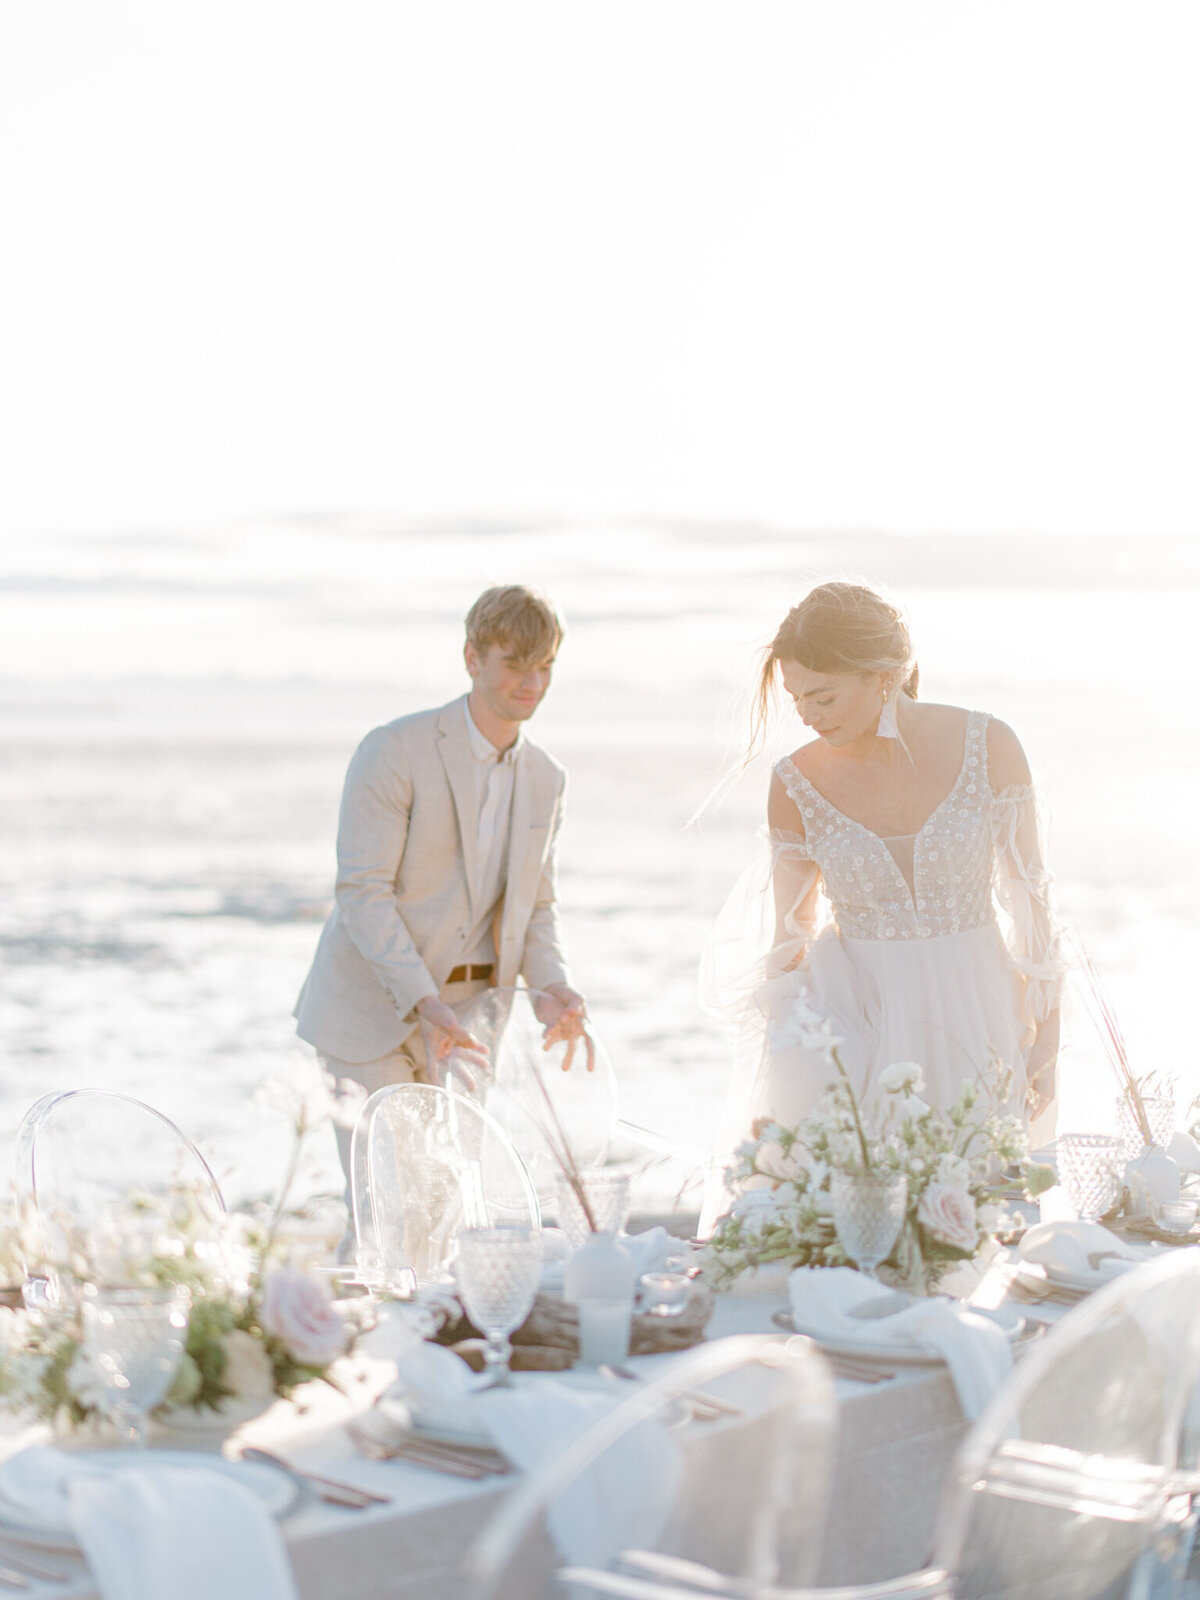 Gorgeous beach wedding inspiration, captured by Julie Jagt Photography, fine art wedding photographer in Vancouver, BC. Featured on the Bronte Bride Vendor Guide.